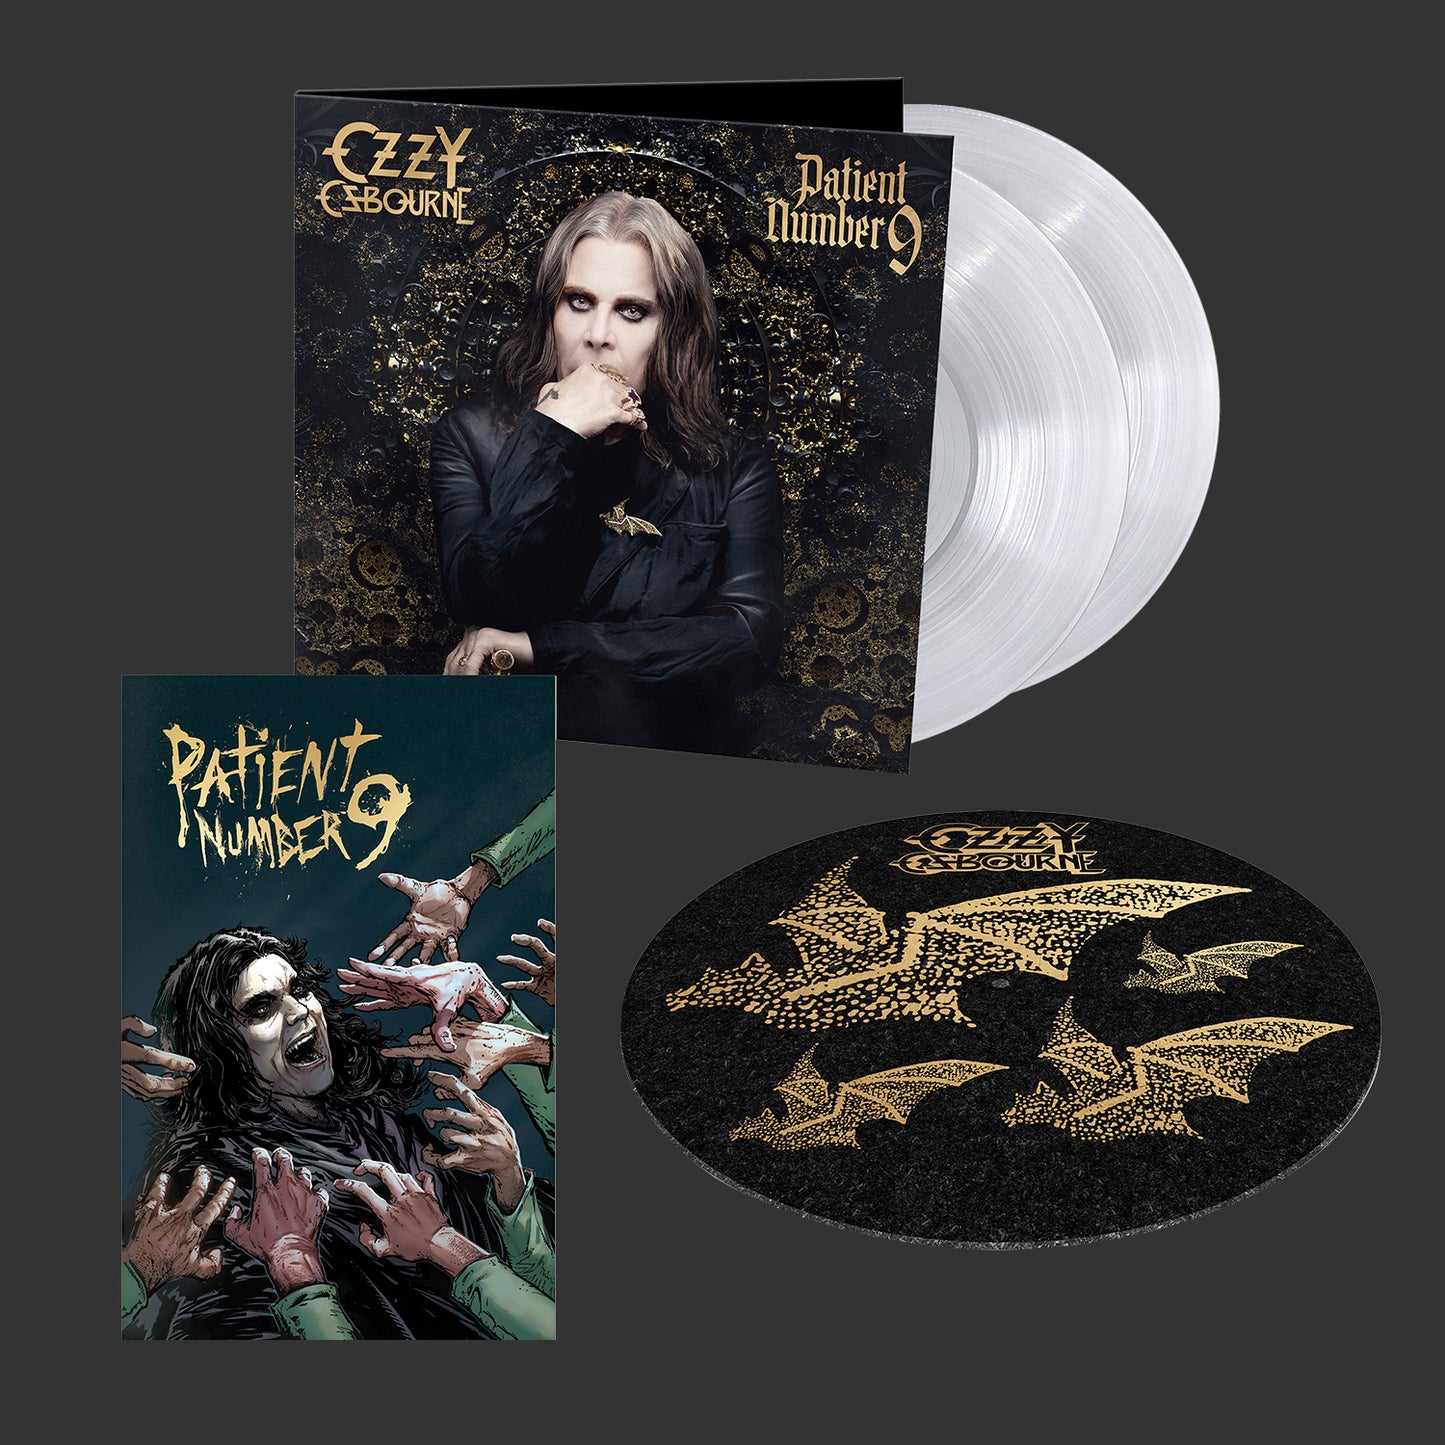 D2C Exclusive 2-LP Crystal Clear vinyl in a special gold embossed Gatefold Package with vinyl slipmat + Limited edition Ozzy Osbourne Patient Number 9 comic book designed by Todd McFarlane.